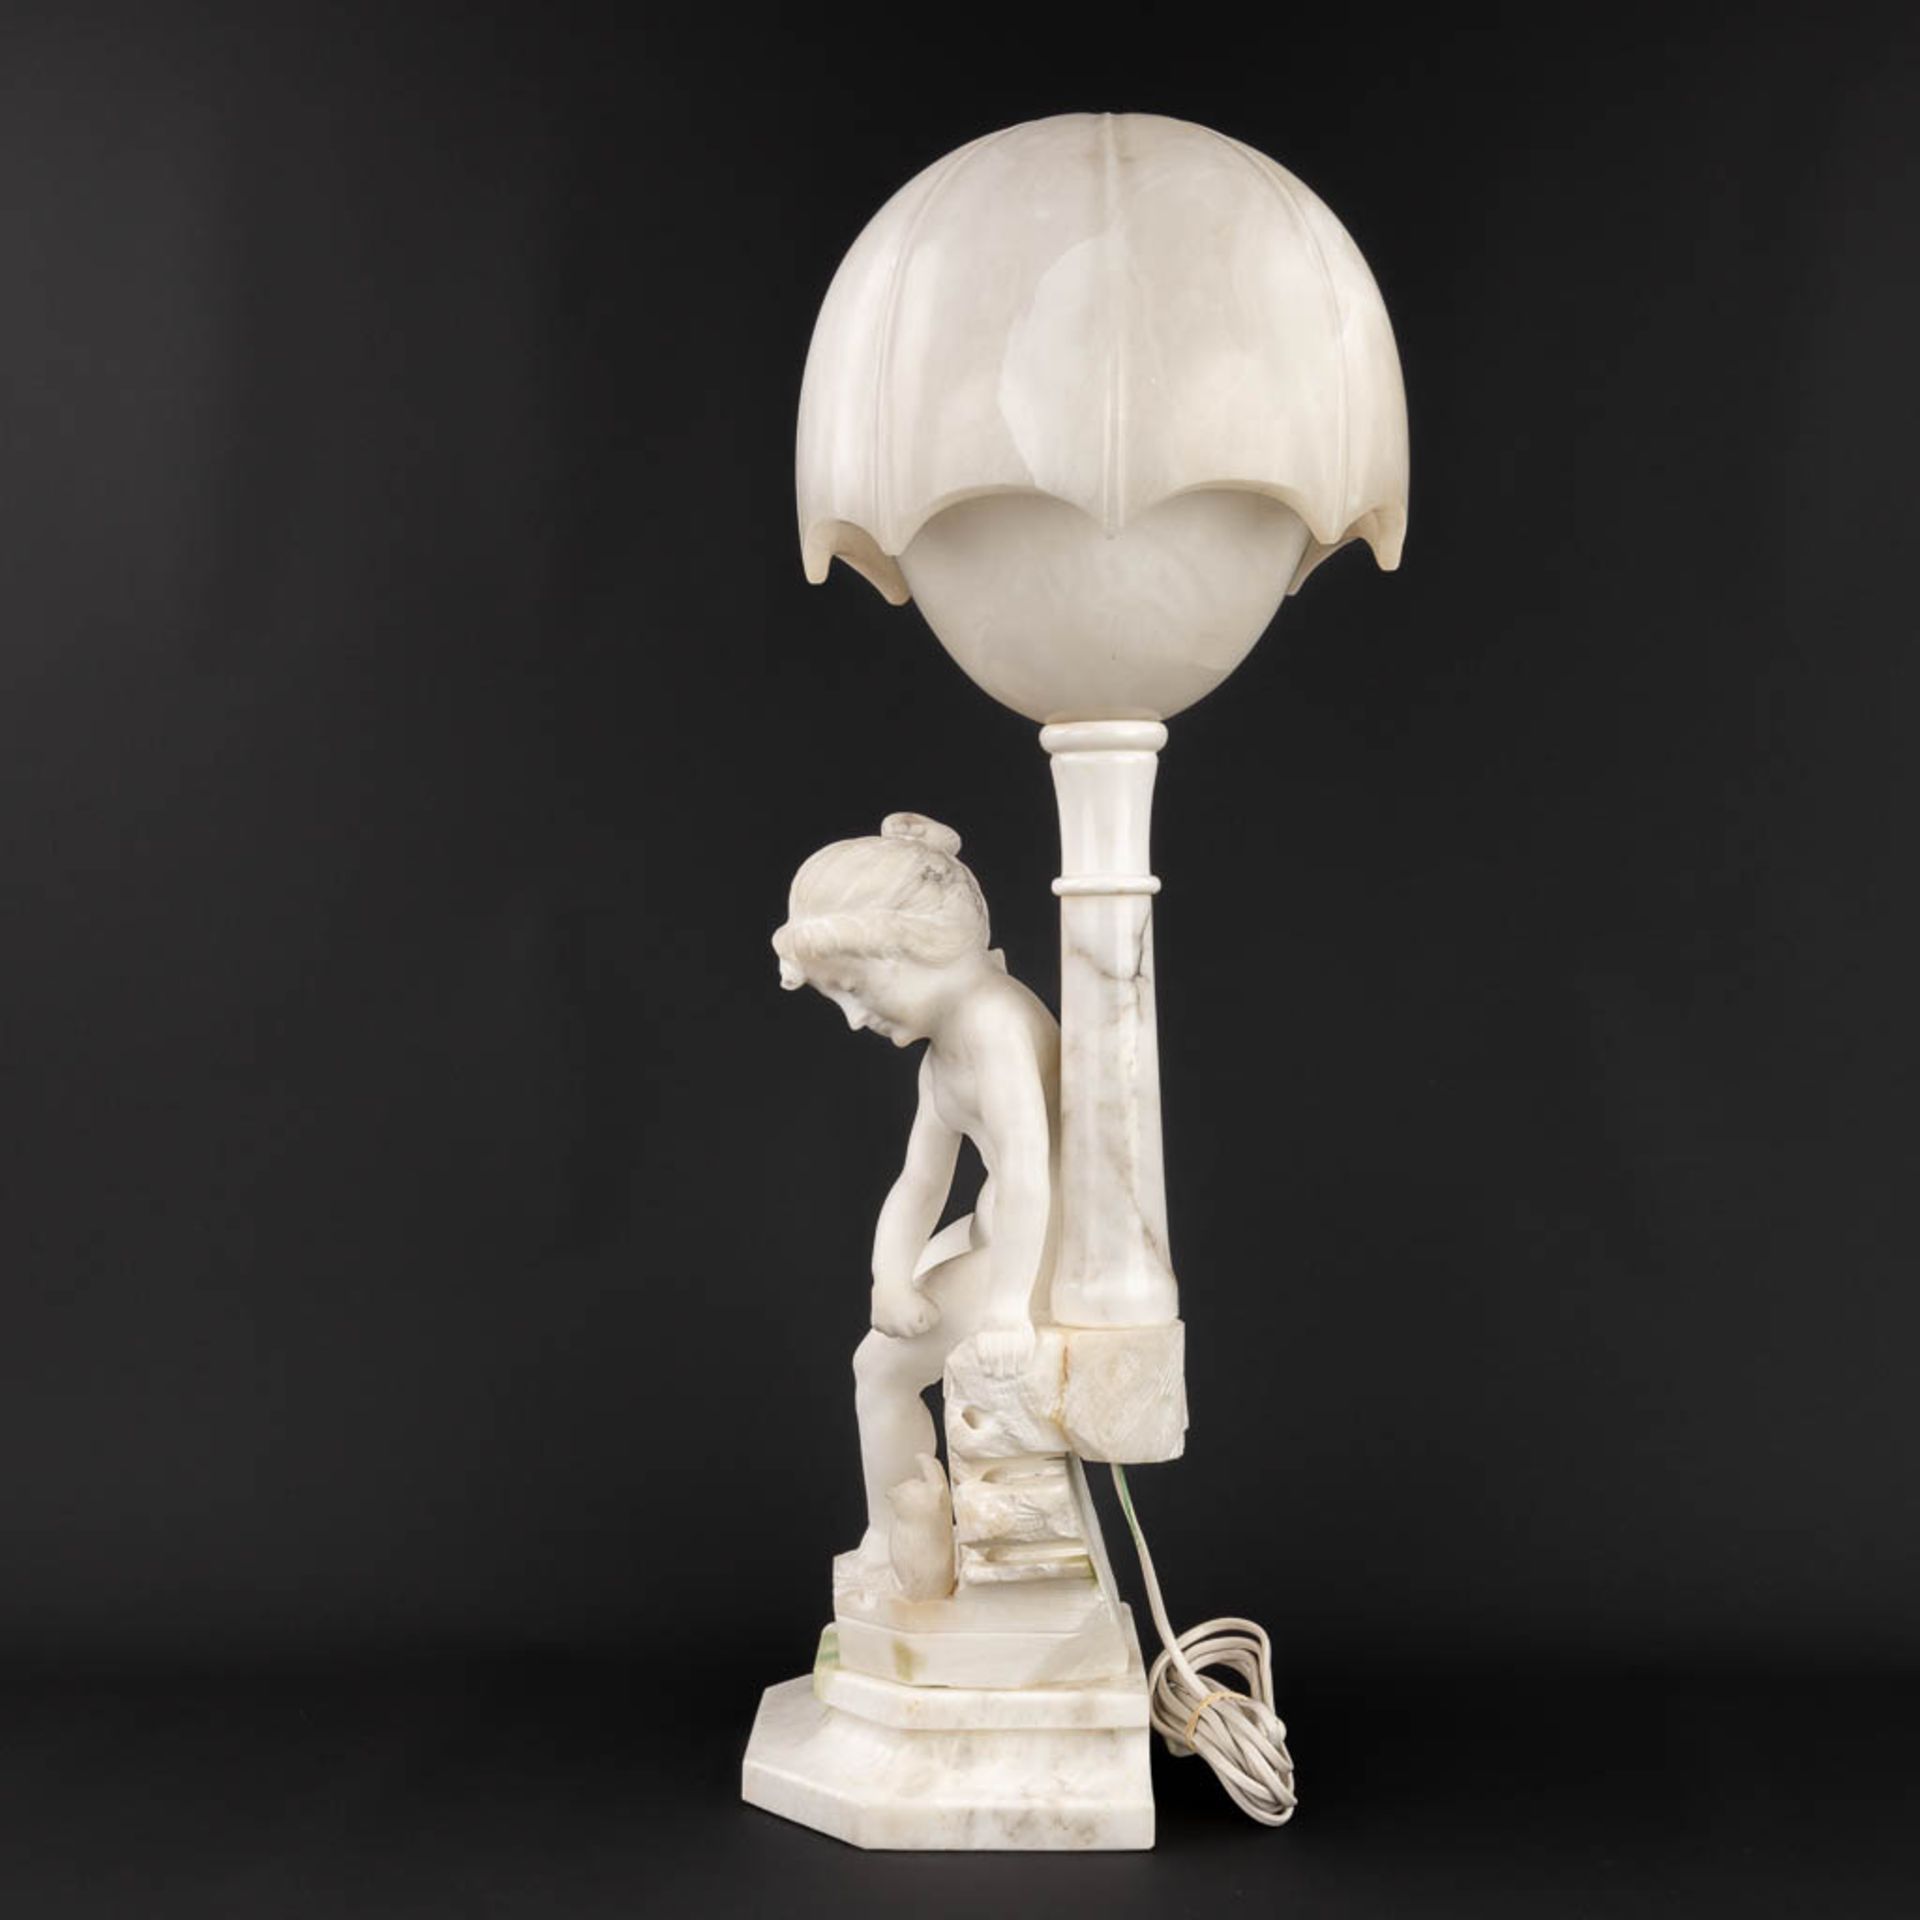 A vintage table lamp, made of sculptured alabaster. Made in Italy, 20th century. (H:71 cm) - Image 4 of 11